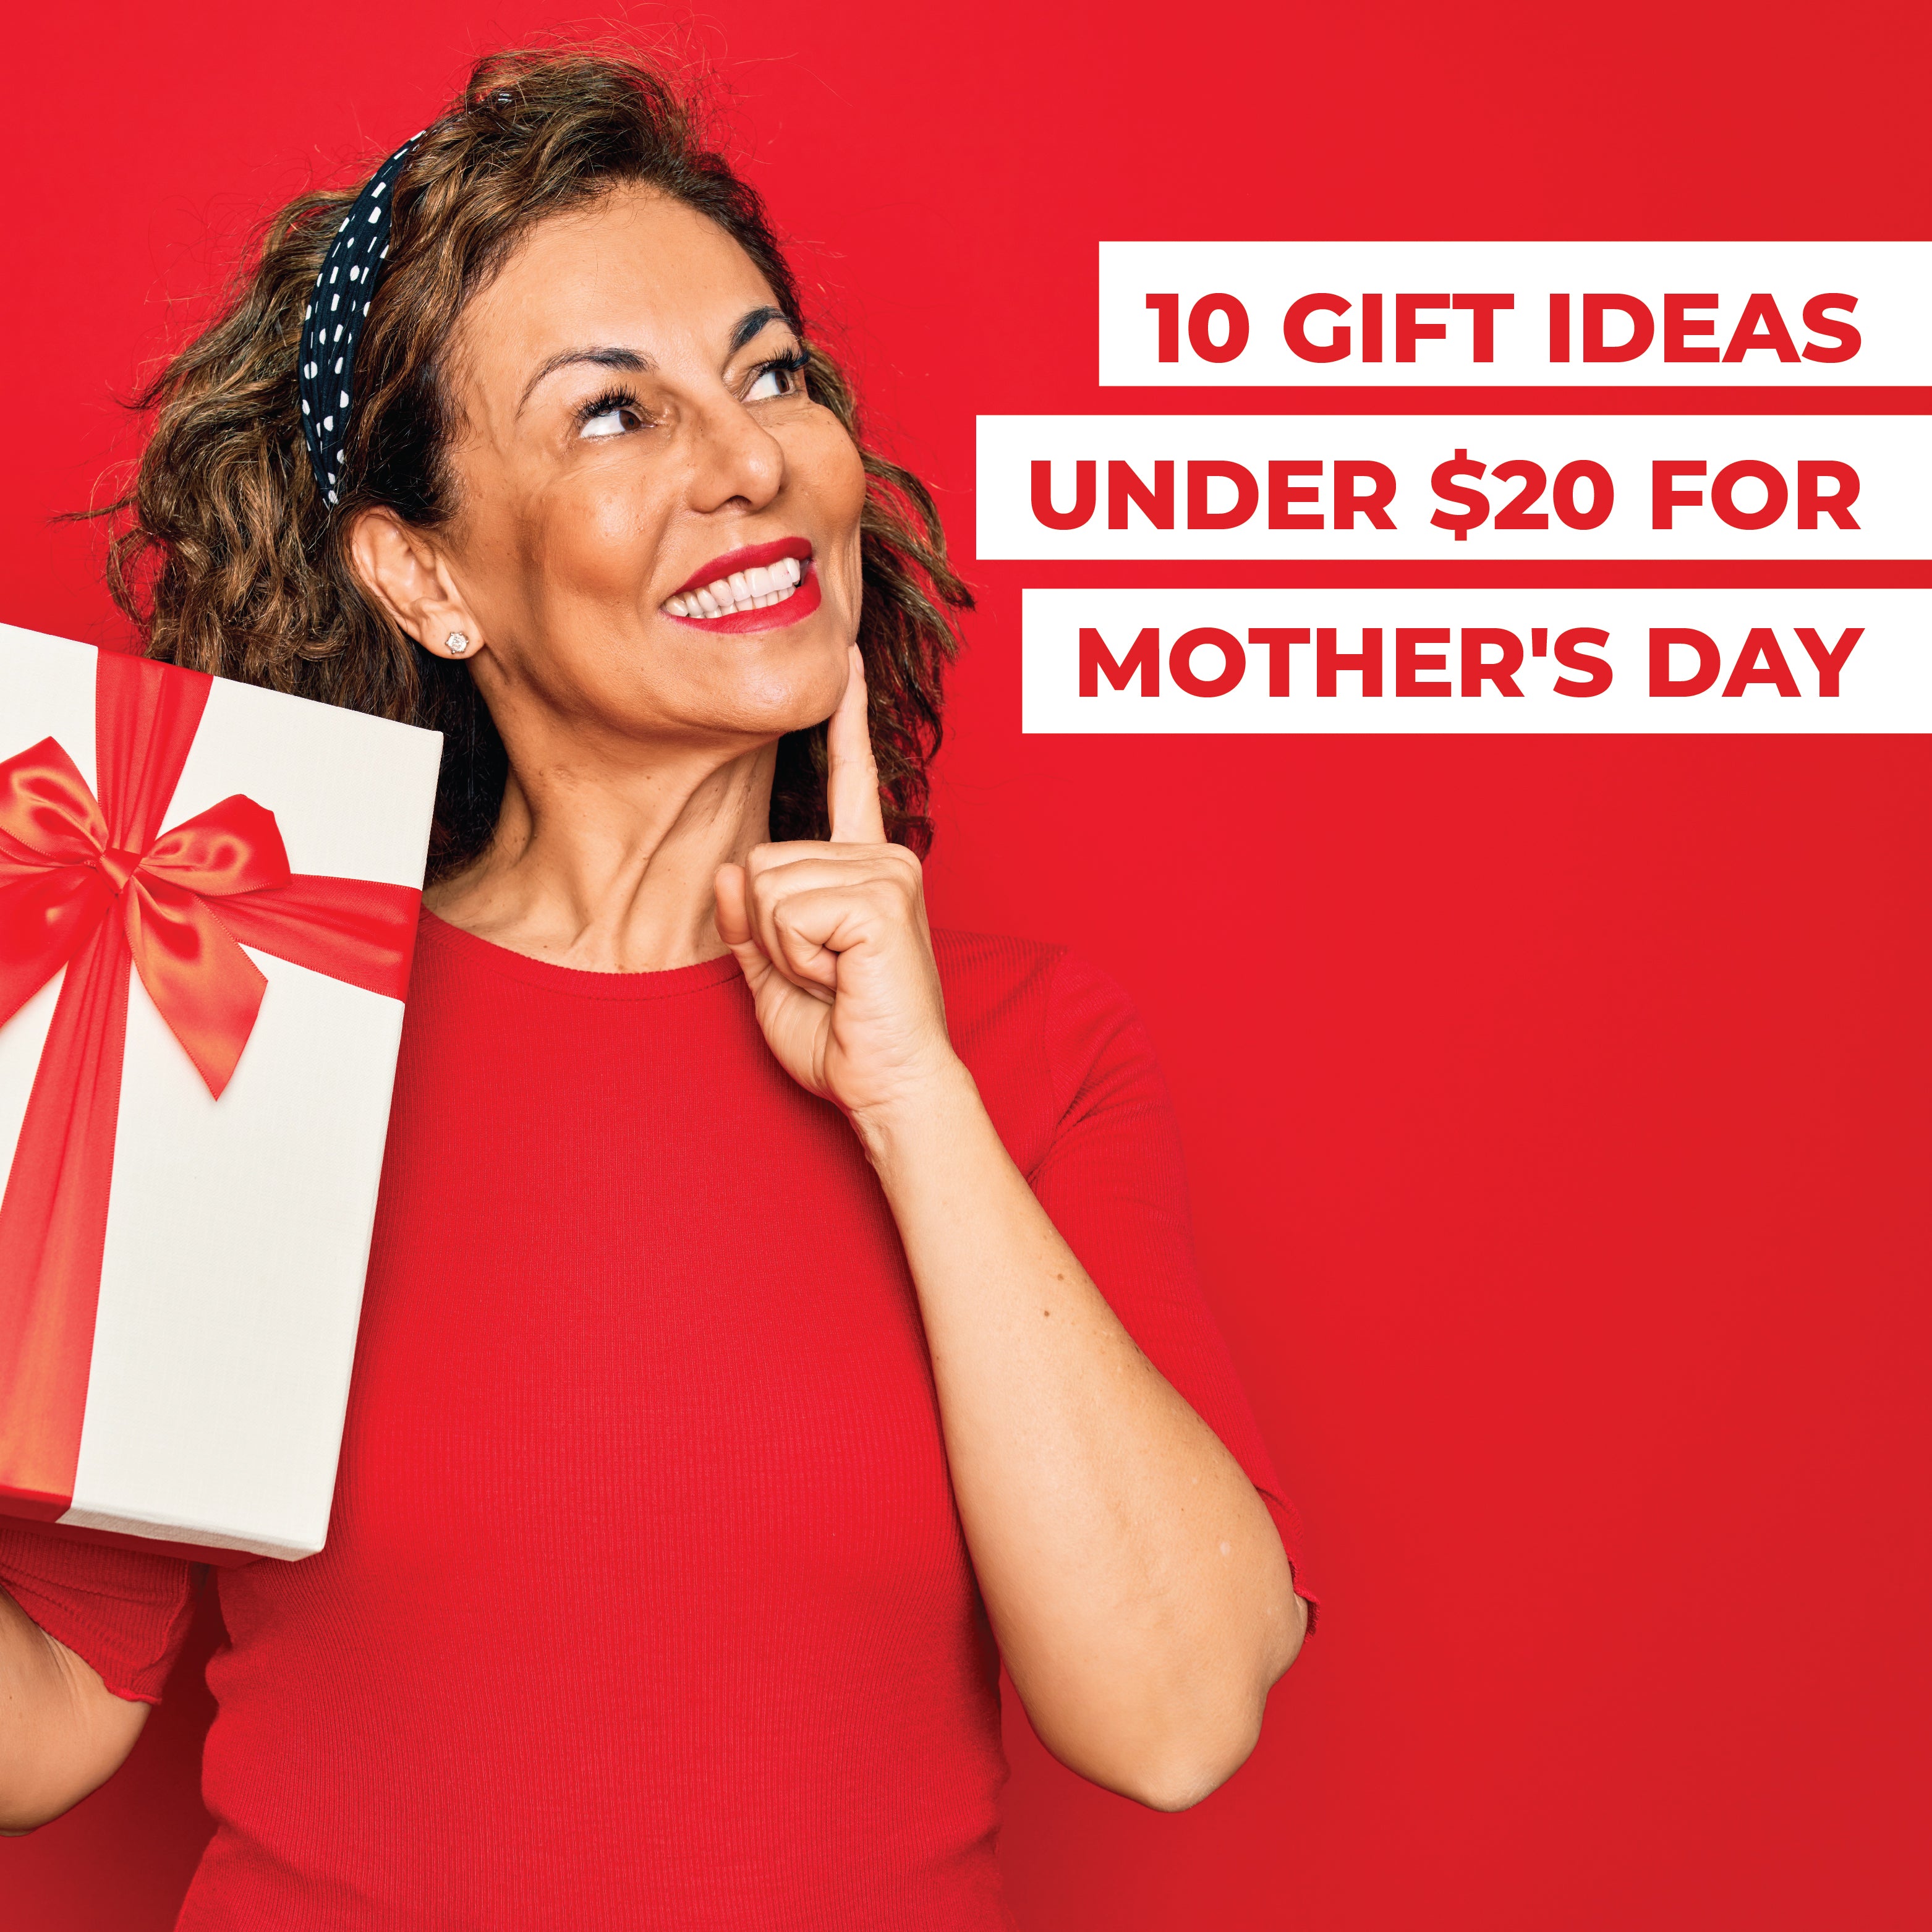 10 Gift Ideas under $20 for Mother's Day 2020